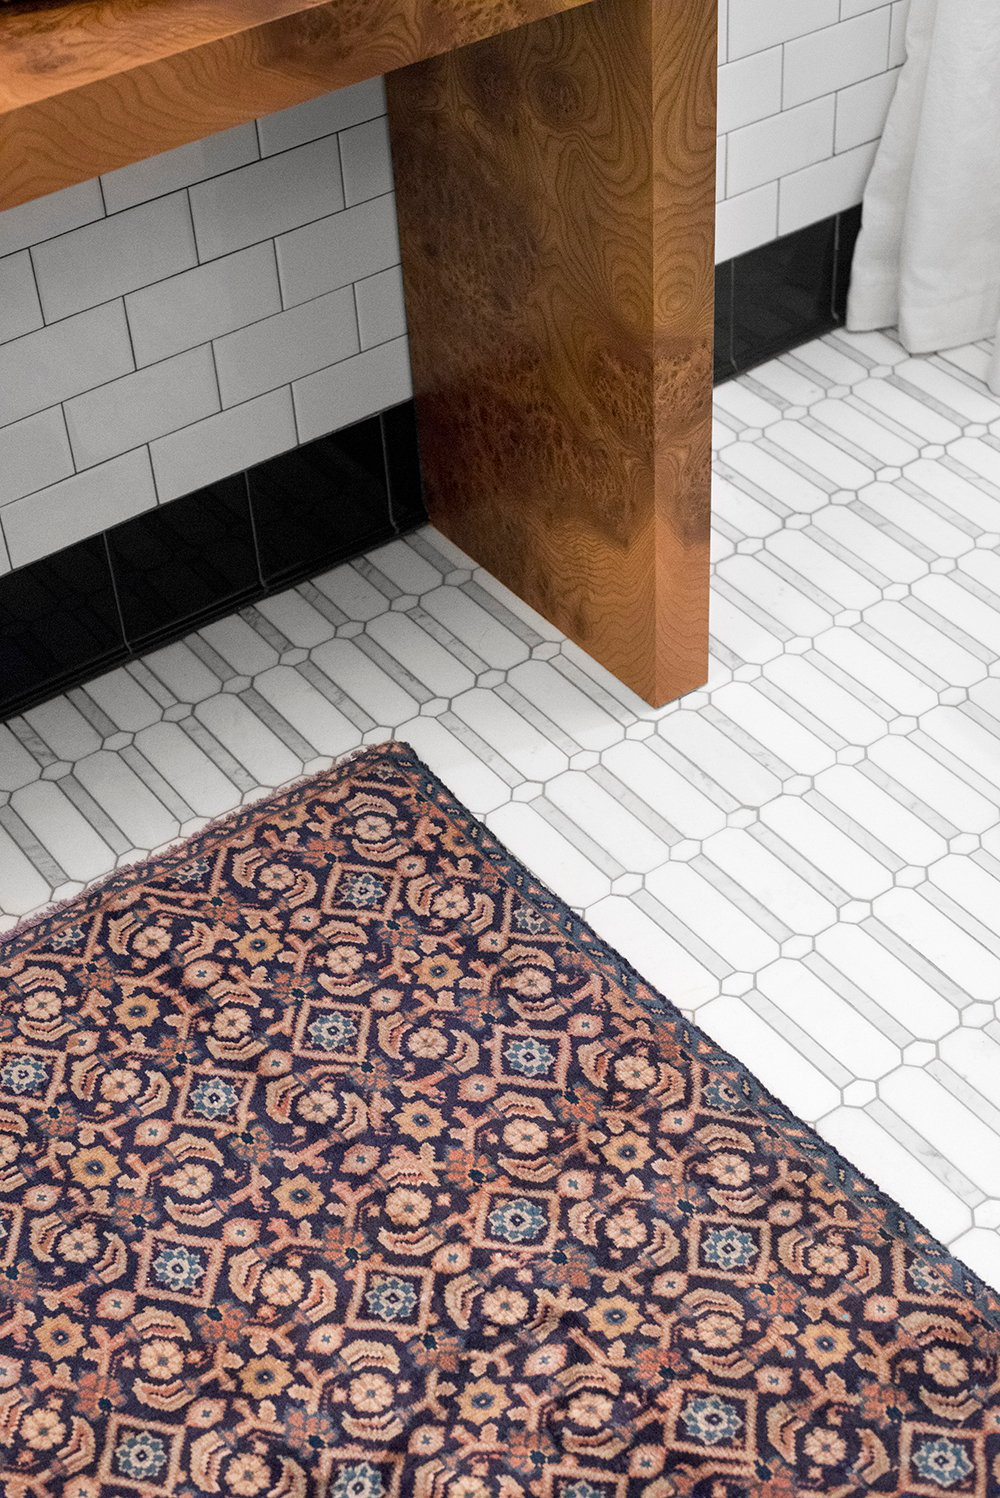 Choosing a Rug for the Bathroom (+ A Vintage Rug Giveaway) - roomfortuesday.com